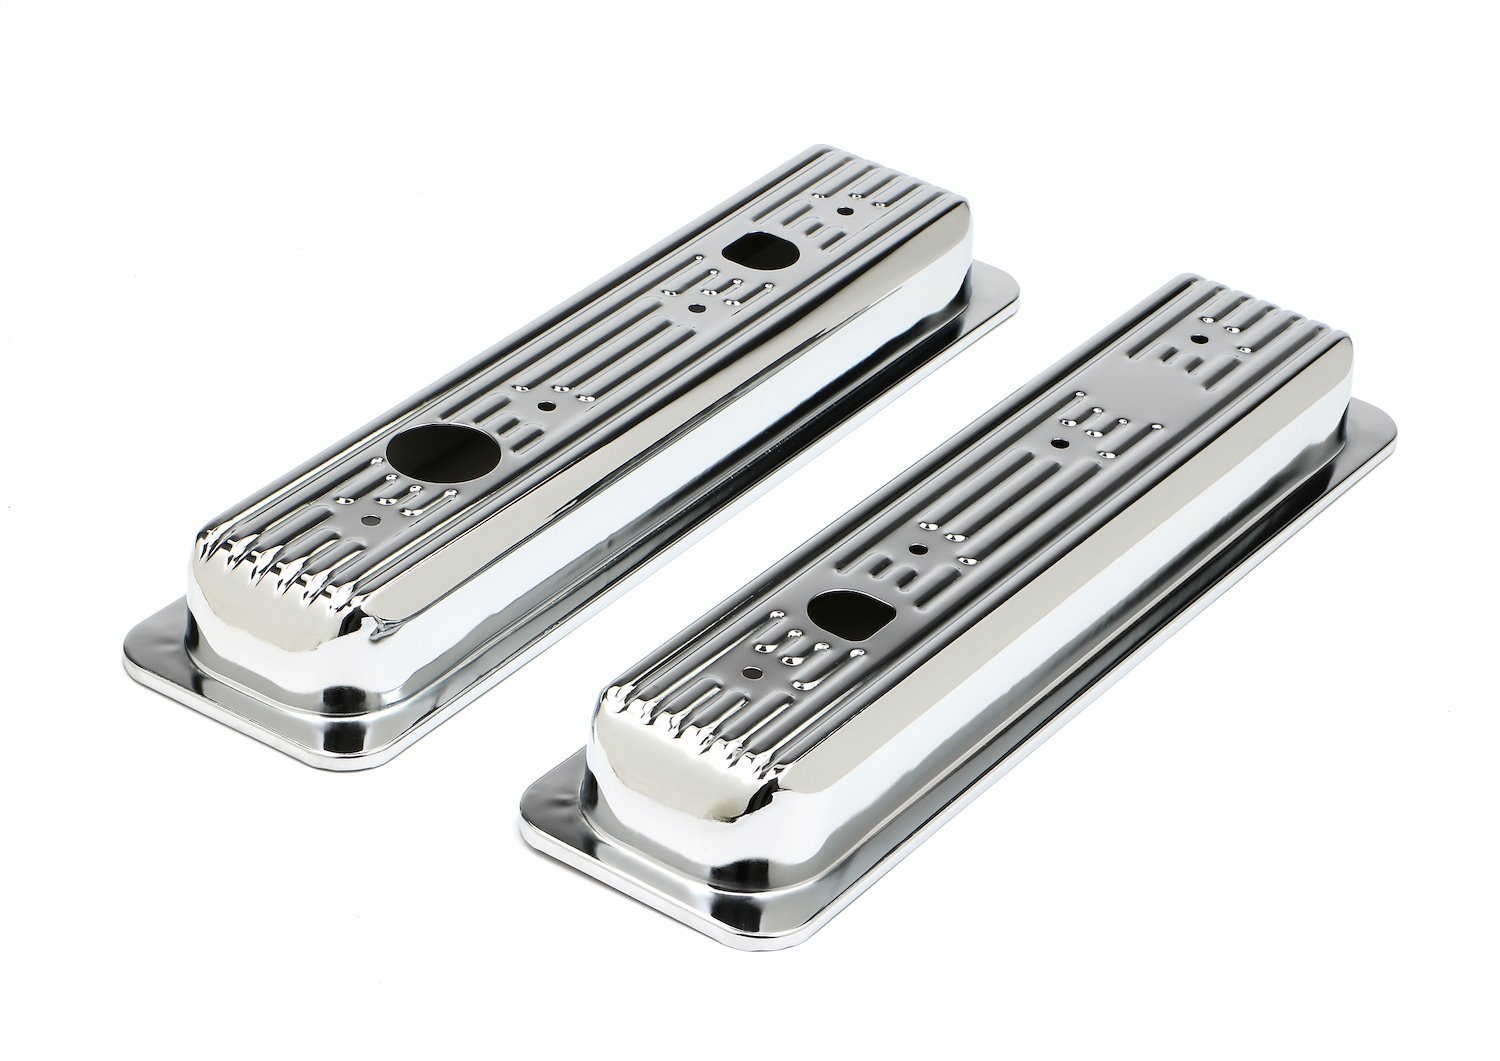 Chrome Plated Steel Valve Cover Caps 1987-1999 Small Block Chevy 5.0L, 5.7L V8